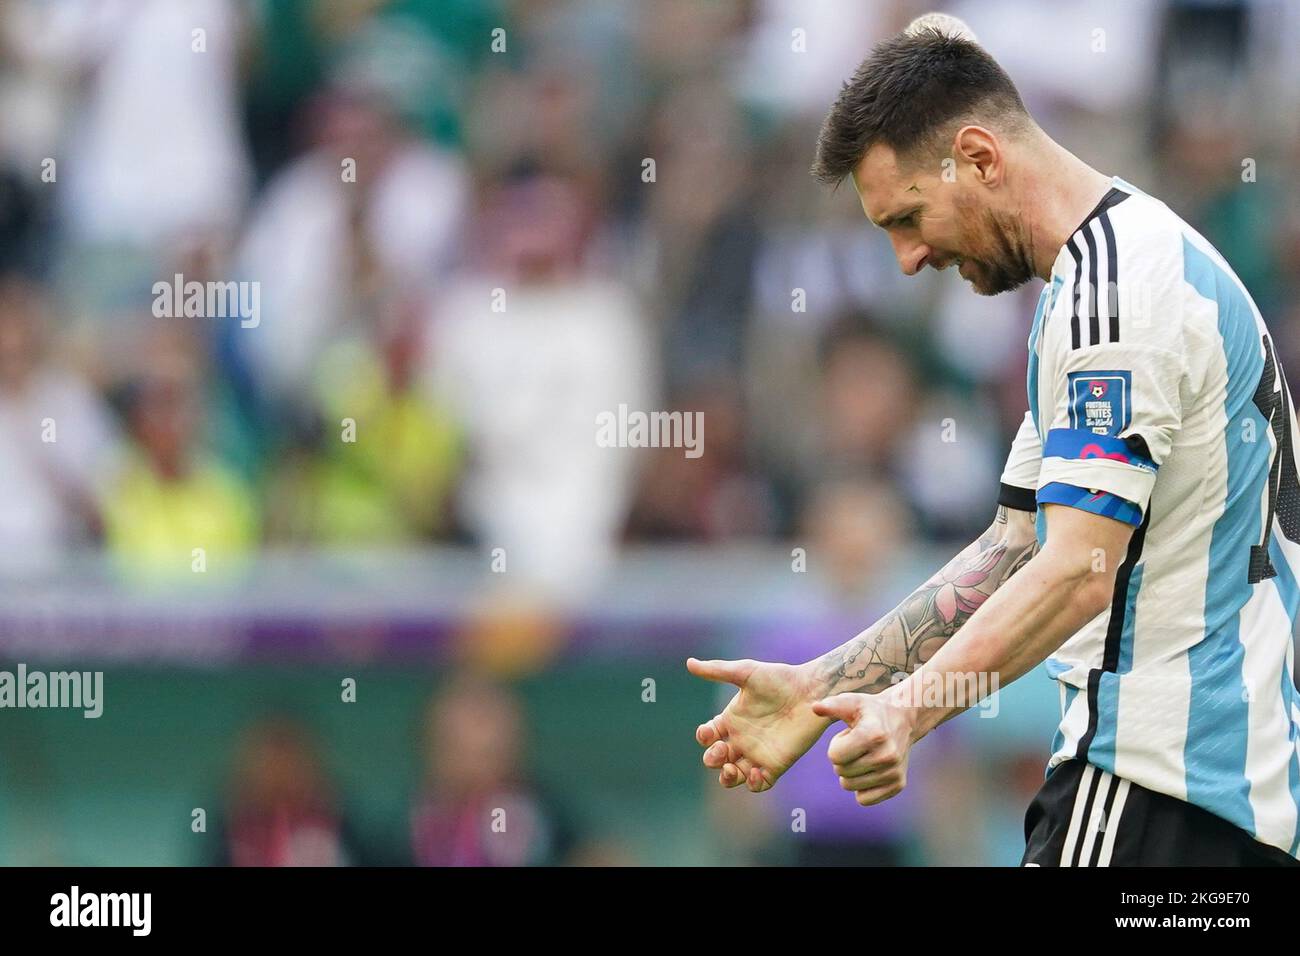 LUSAIL, QATAR - NOVEMBER 22: Player of Argentina Lionel Messi reacts during the 2022 FIFA World Cup Qatar group C between Argentina and Saudi Arabia at Lusail Stadium on November 22, 2022 in Lusail, Qatar. (Photo by Florencia Tan Jun/PxImages) Stock Photo